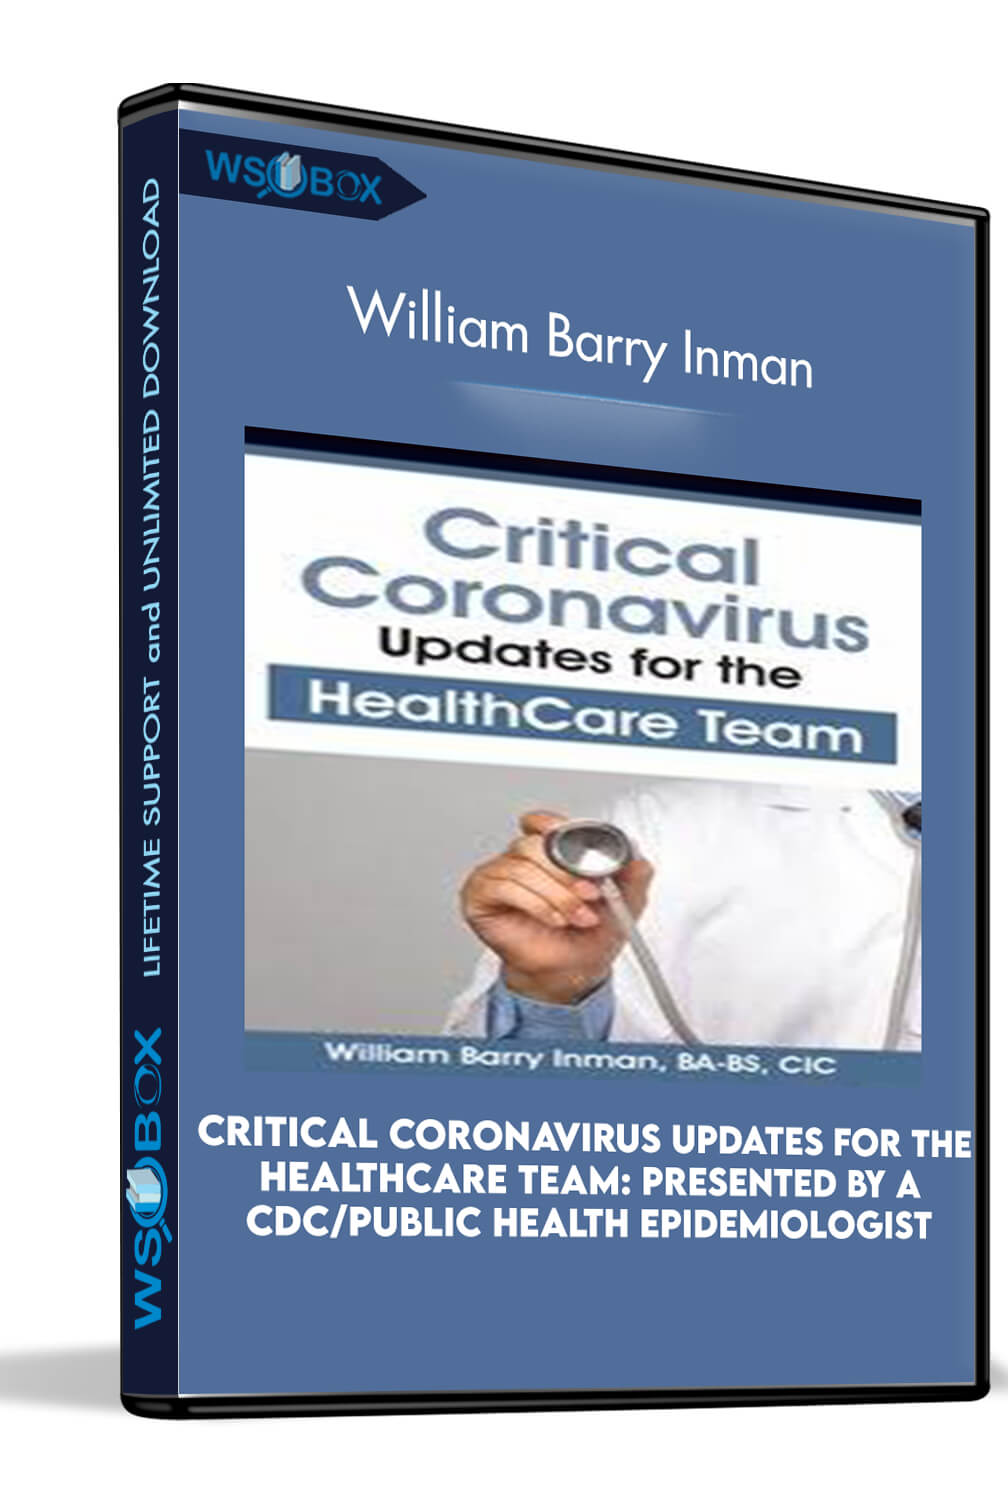 Critical Coronavirus Updates for the Healthcare Team: Presented by a CDC/Public Health Epidemiologist